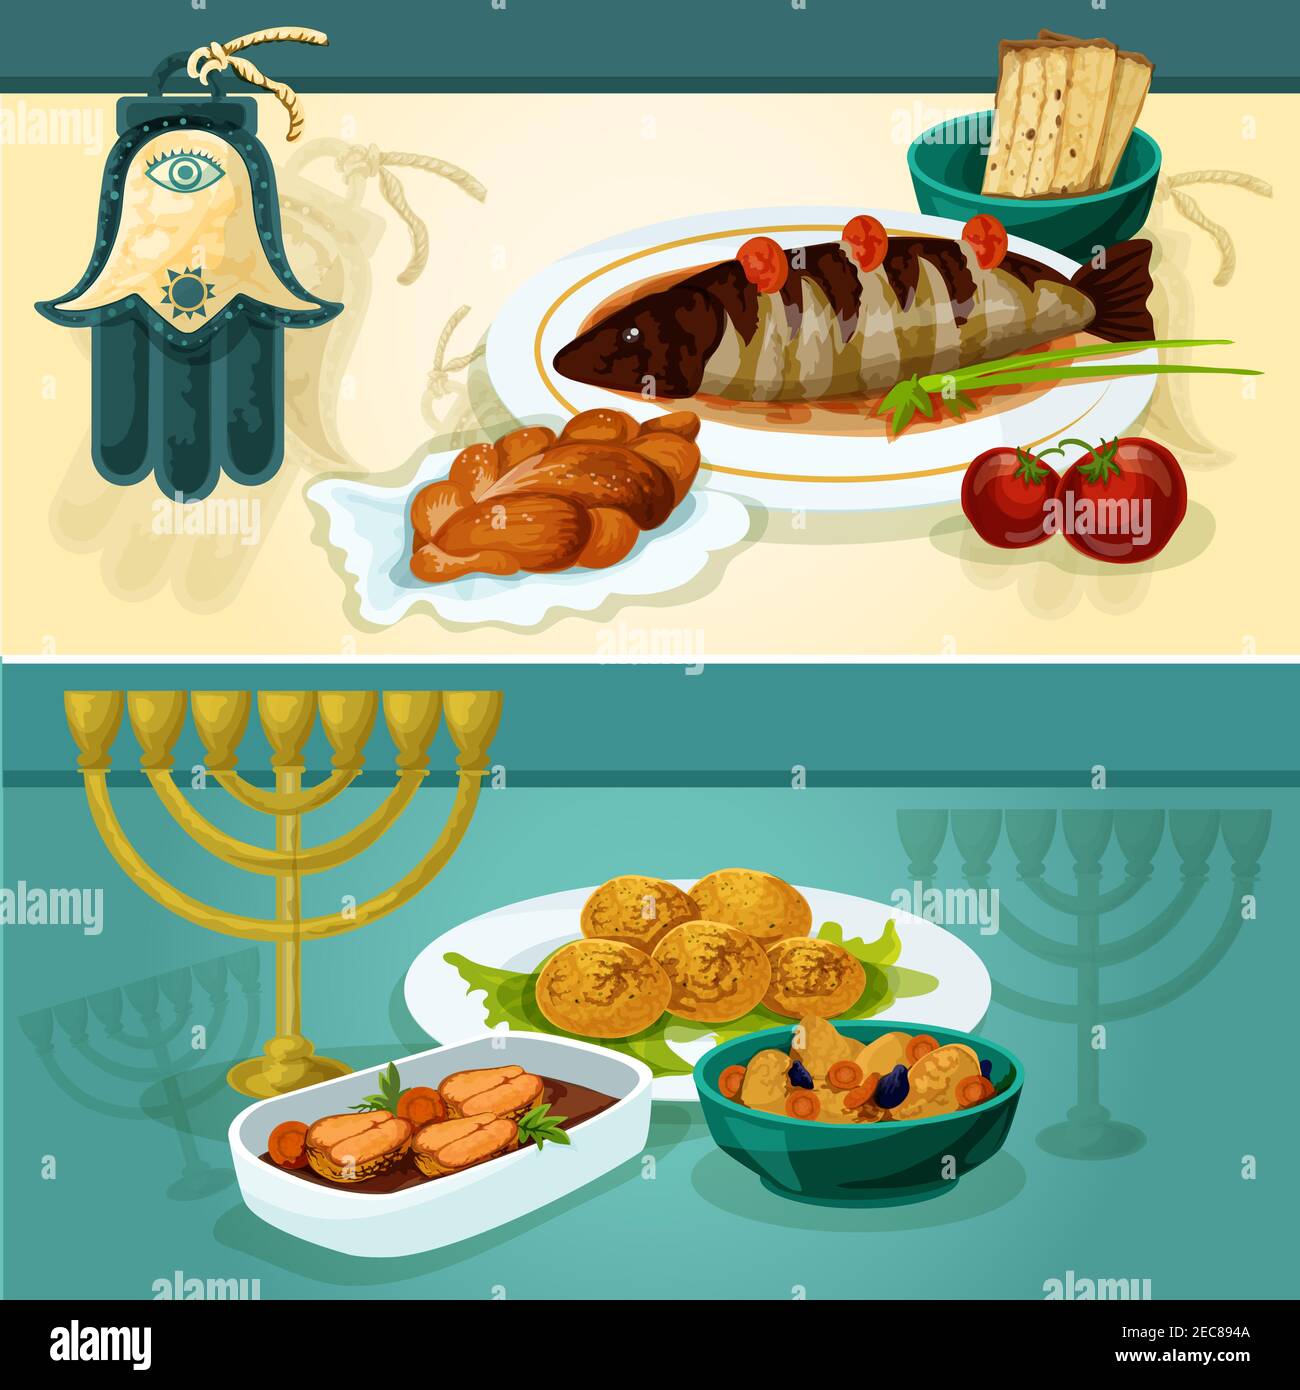 Jewish cuisine festive dinner banners with matzah and challah bread, gefilte fish, chickpea falafel, stuffed pike fish and lamb stew with hamsa hand a Stock Vector